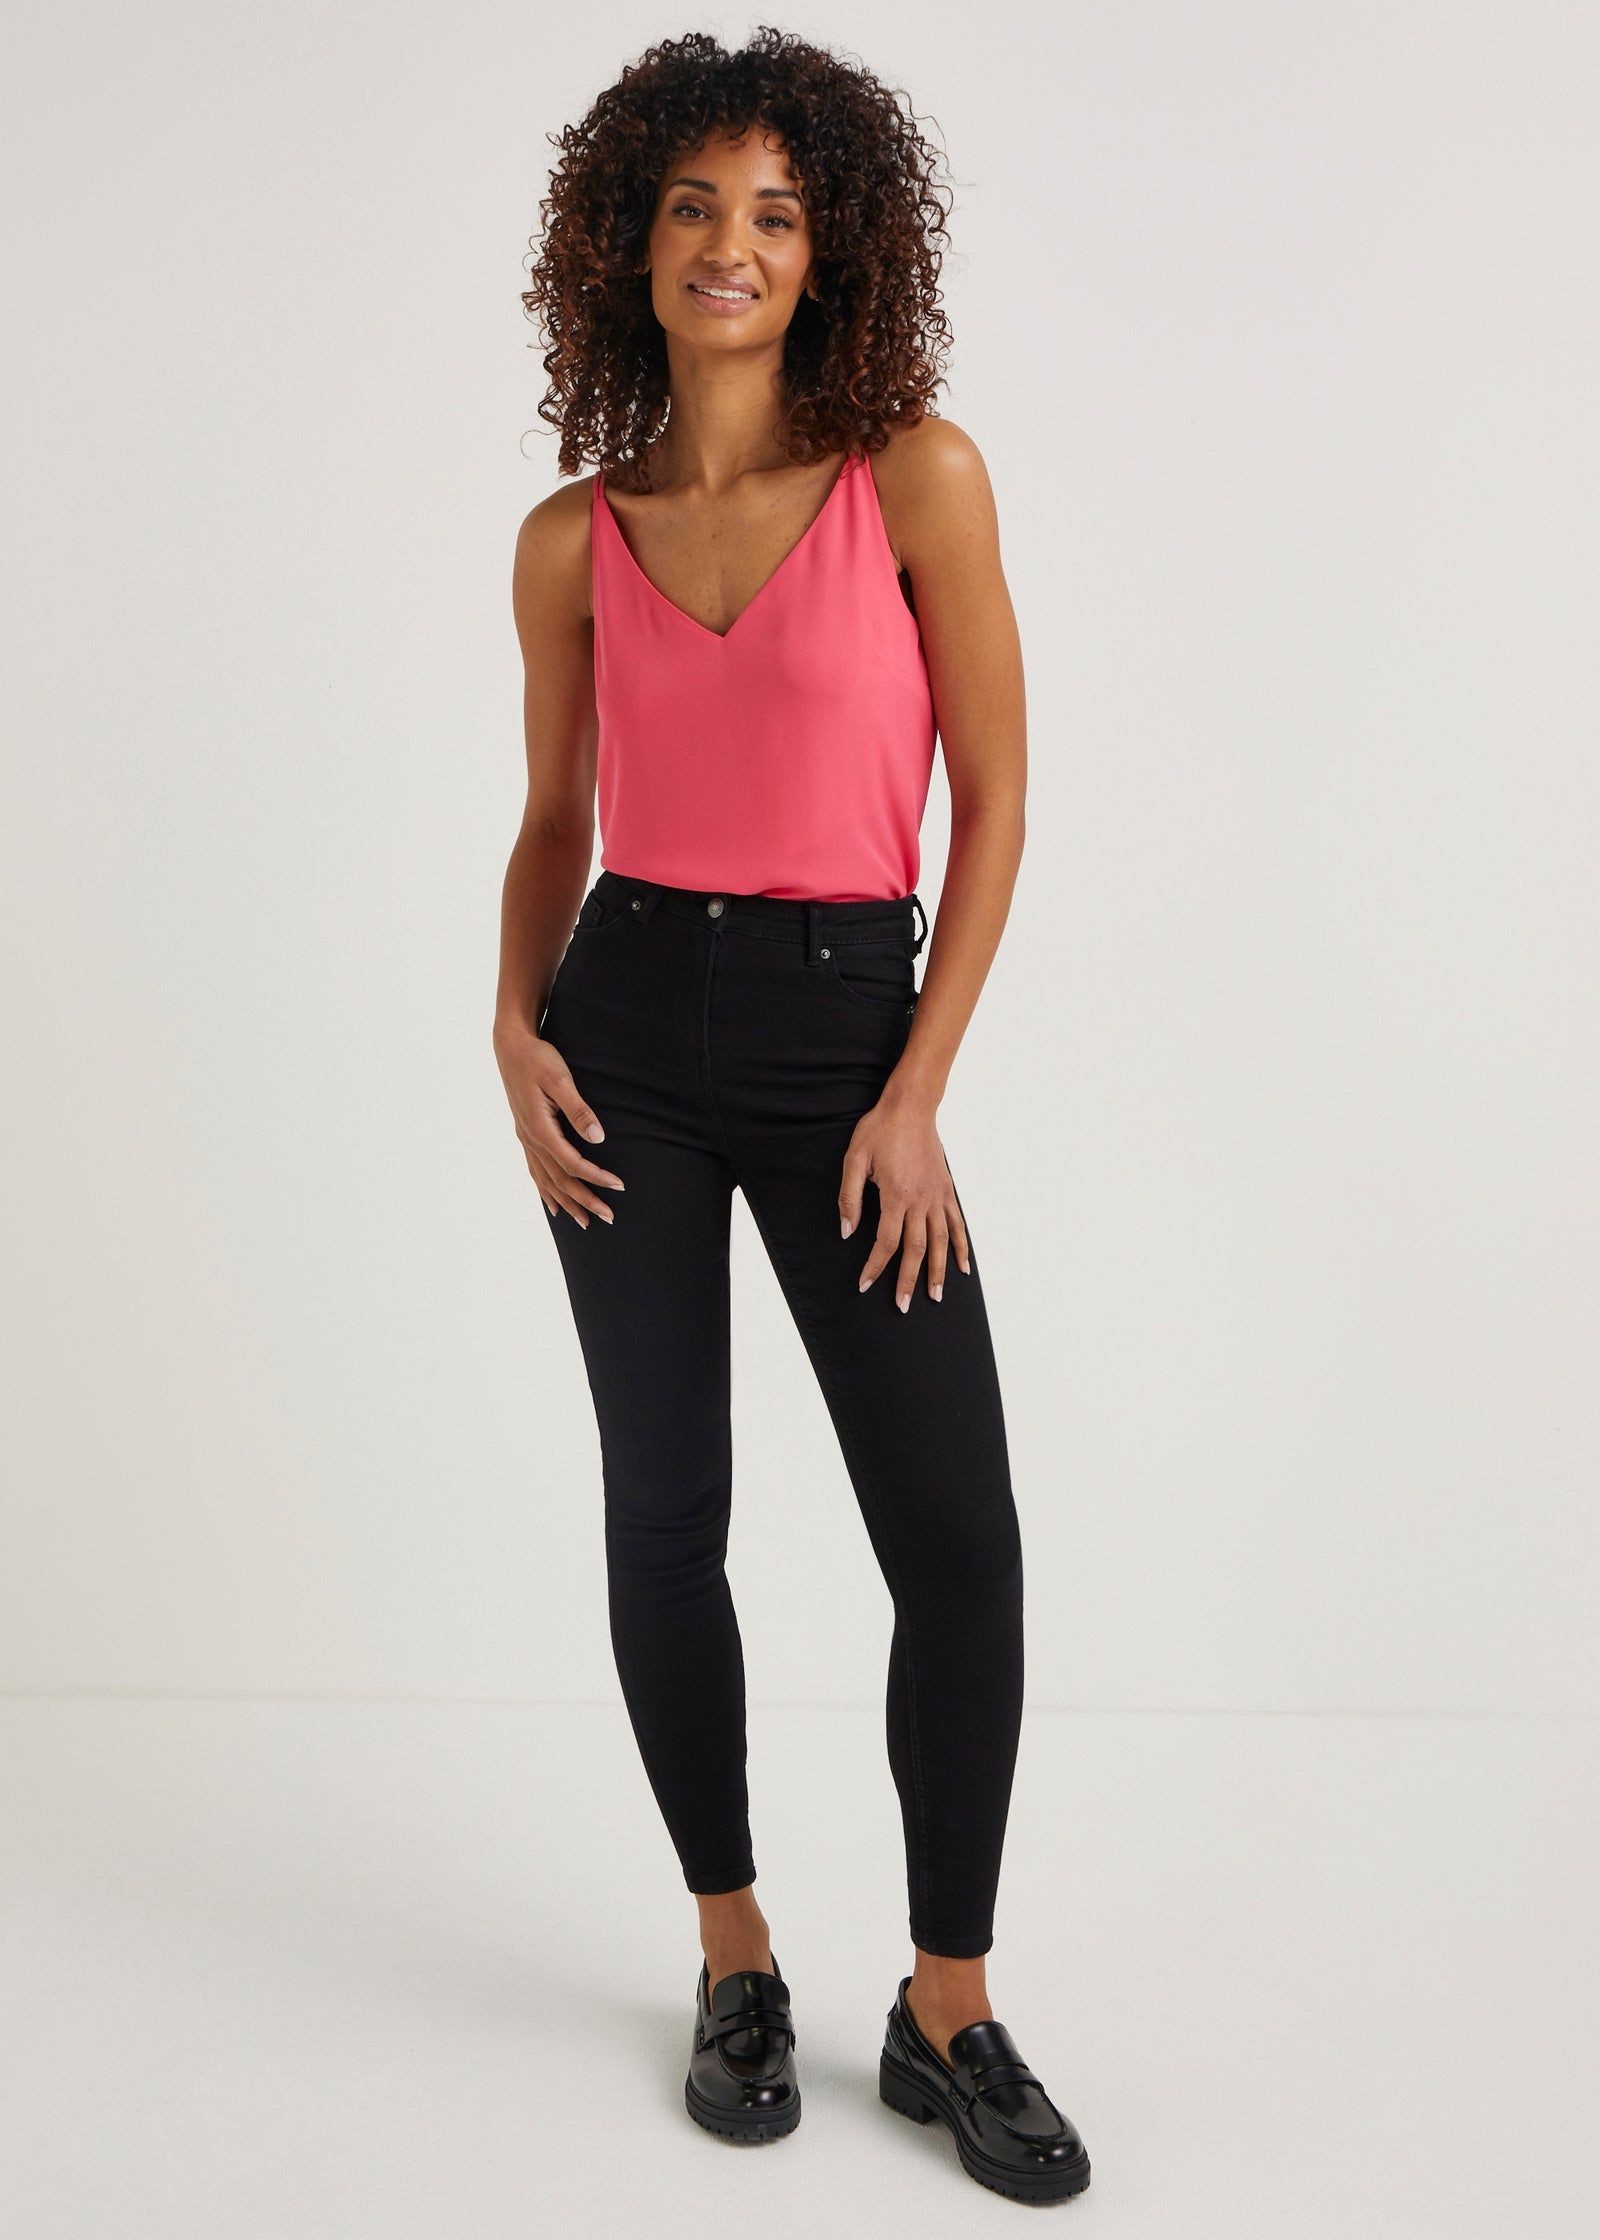 Buy Matalan Women's Jeans & Jeggings at Lowest Price in UAE